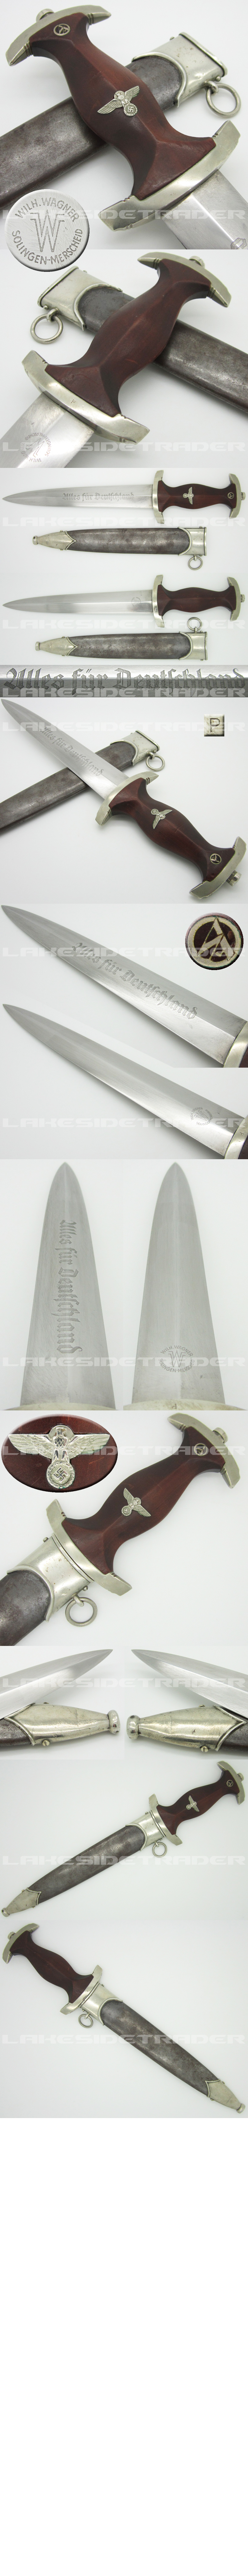 Rare Early SA Dagger by Wilh. Wagner